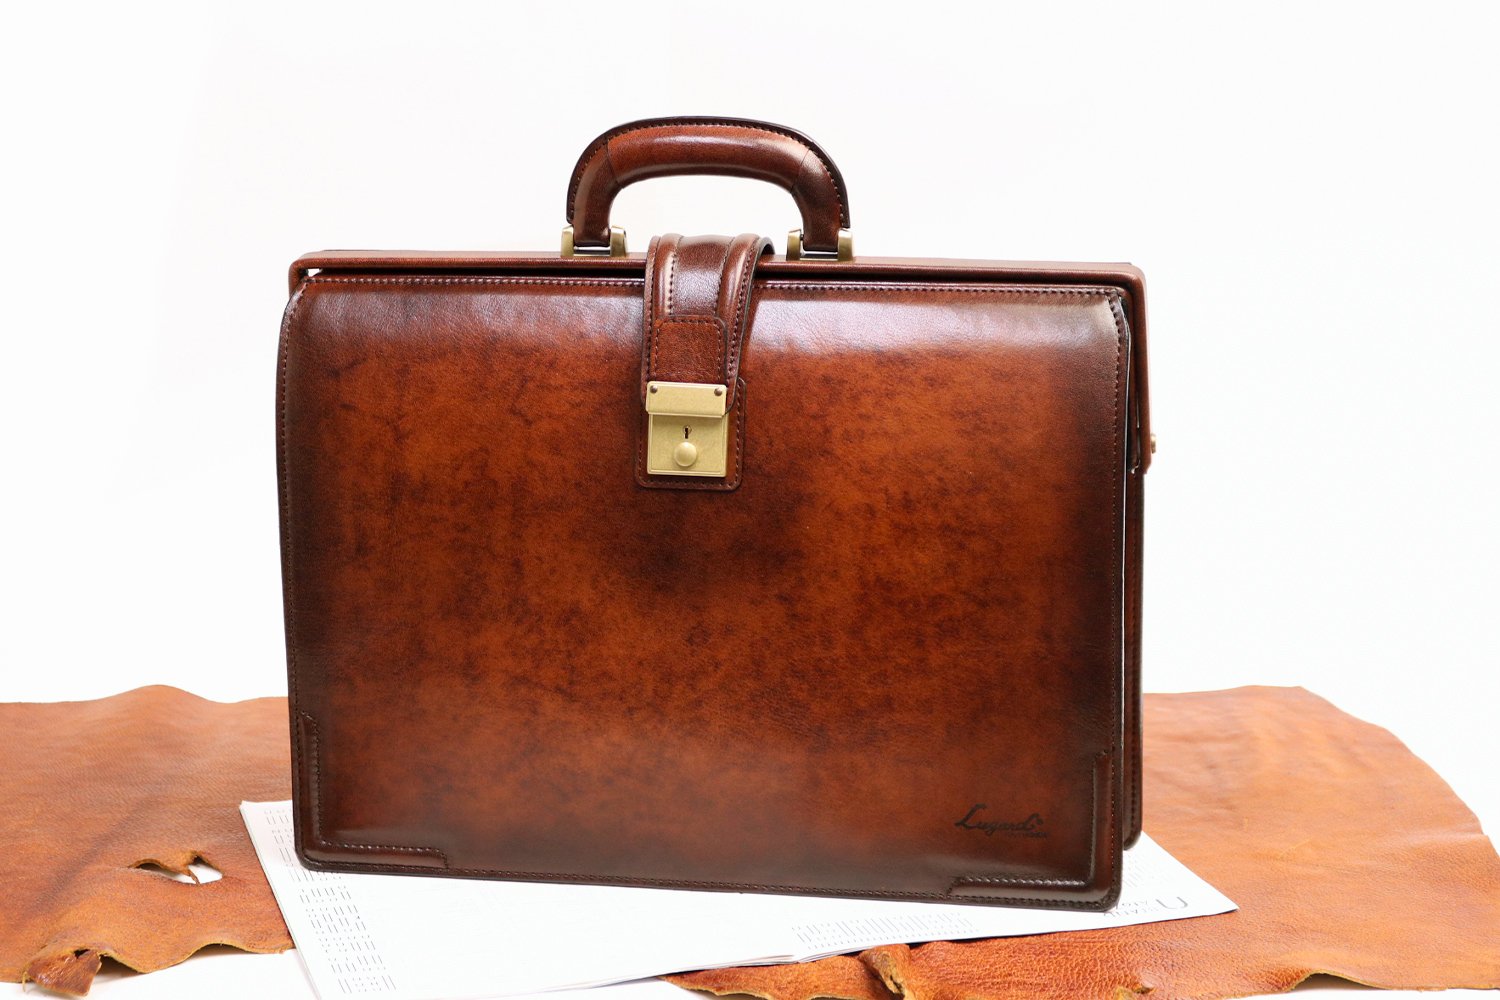 Lugard /G-3 One-of-a-kind shadow finish. A slim Dulles bag with a vintage feel